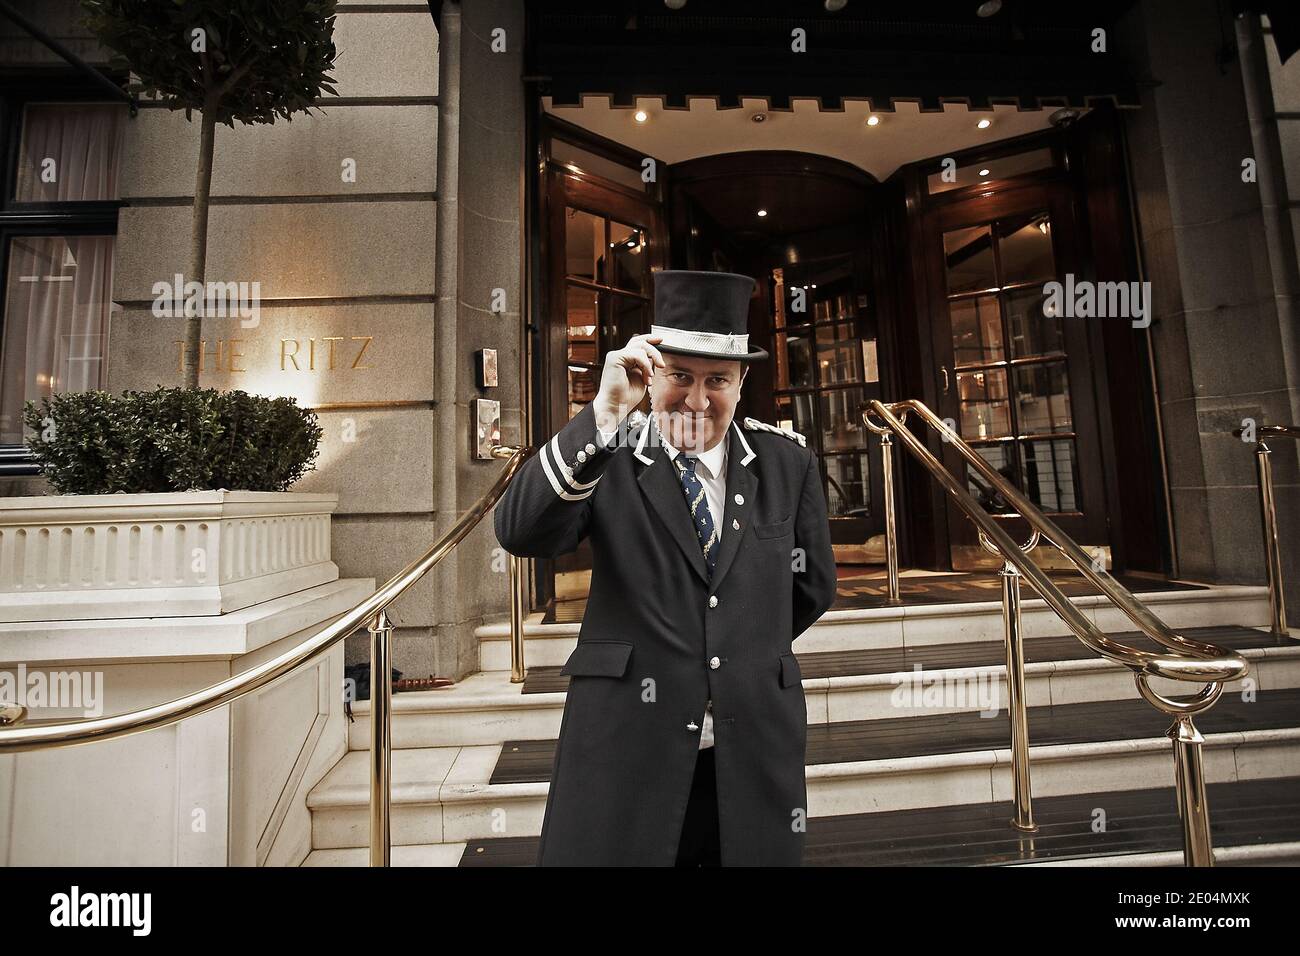 GREAT BRITAIN / London /Door man at The Ritz Hotel, London is one of the most prestigious hotels in the UK. Stock Photo